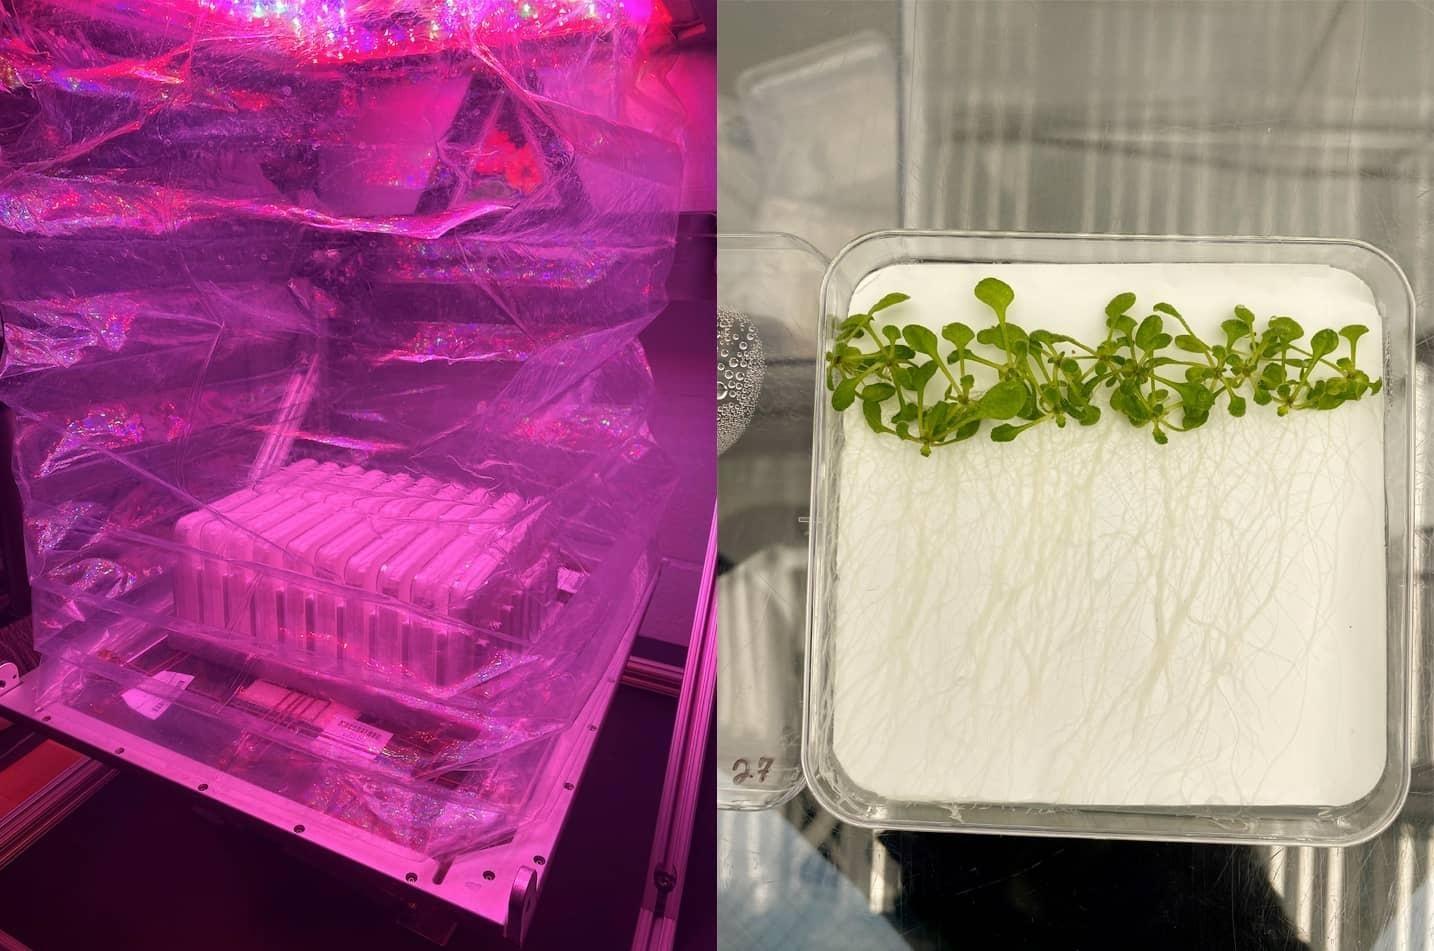 Two images: (on left) Plants grow in square container under plastic wrap with bright purple grow light. (on right) Open plant growth chamber with thale cress and roots visible.